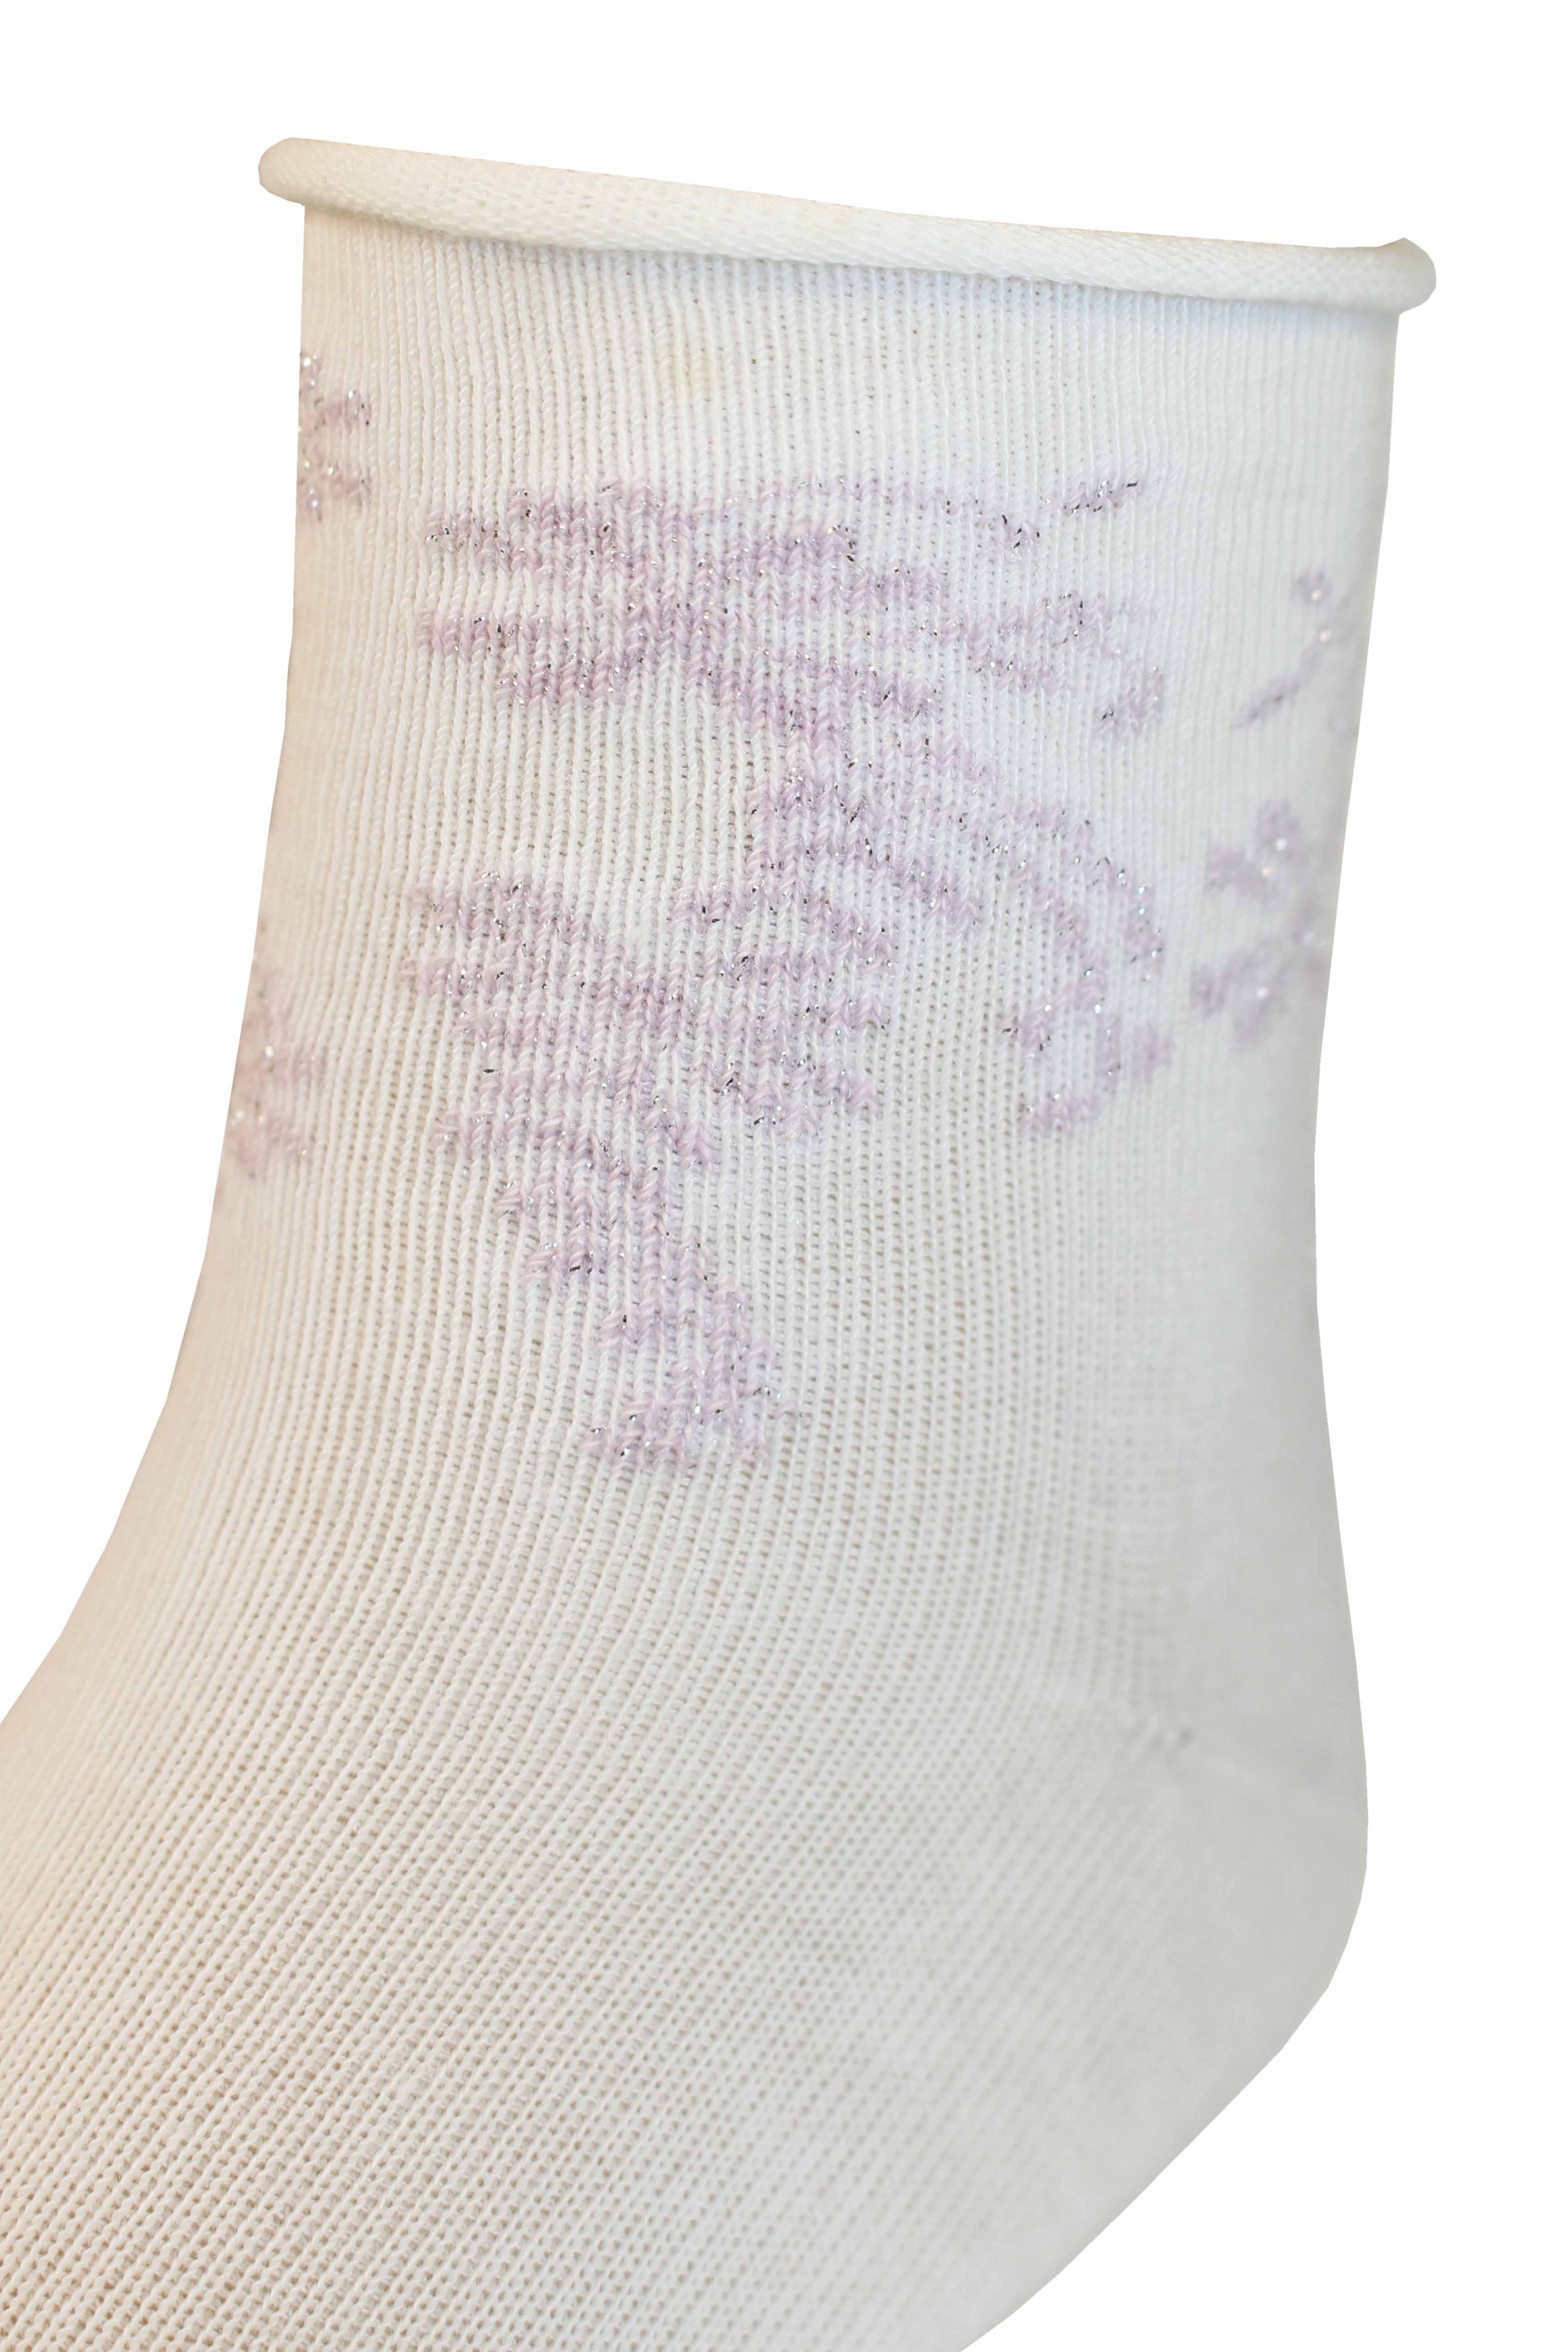 Omsa Serenella Origami Calzino - Light pink kid's cotton ankle socks with a horizontal stripe pattern in pastel shades of lilac, pink, yellow and white with a double sock effect cuff with scalloped edge on one cuff and roll top no cuff on the other with a floral pattern.